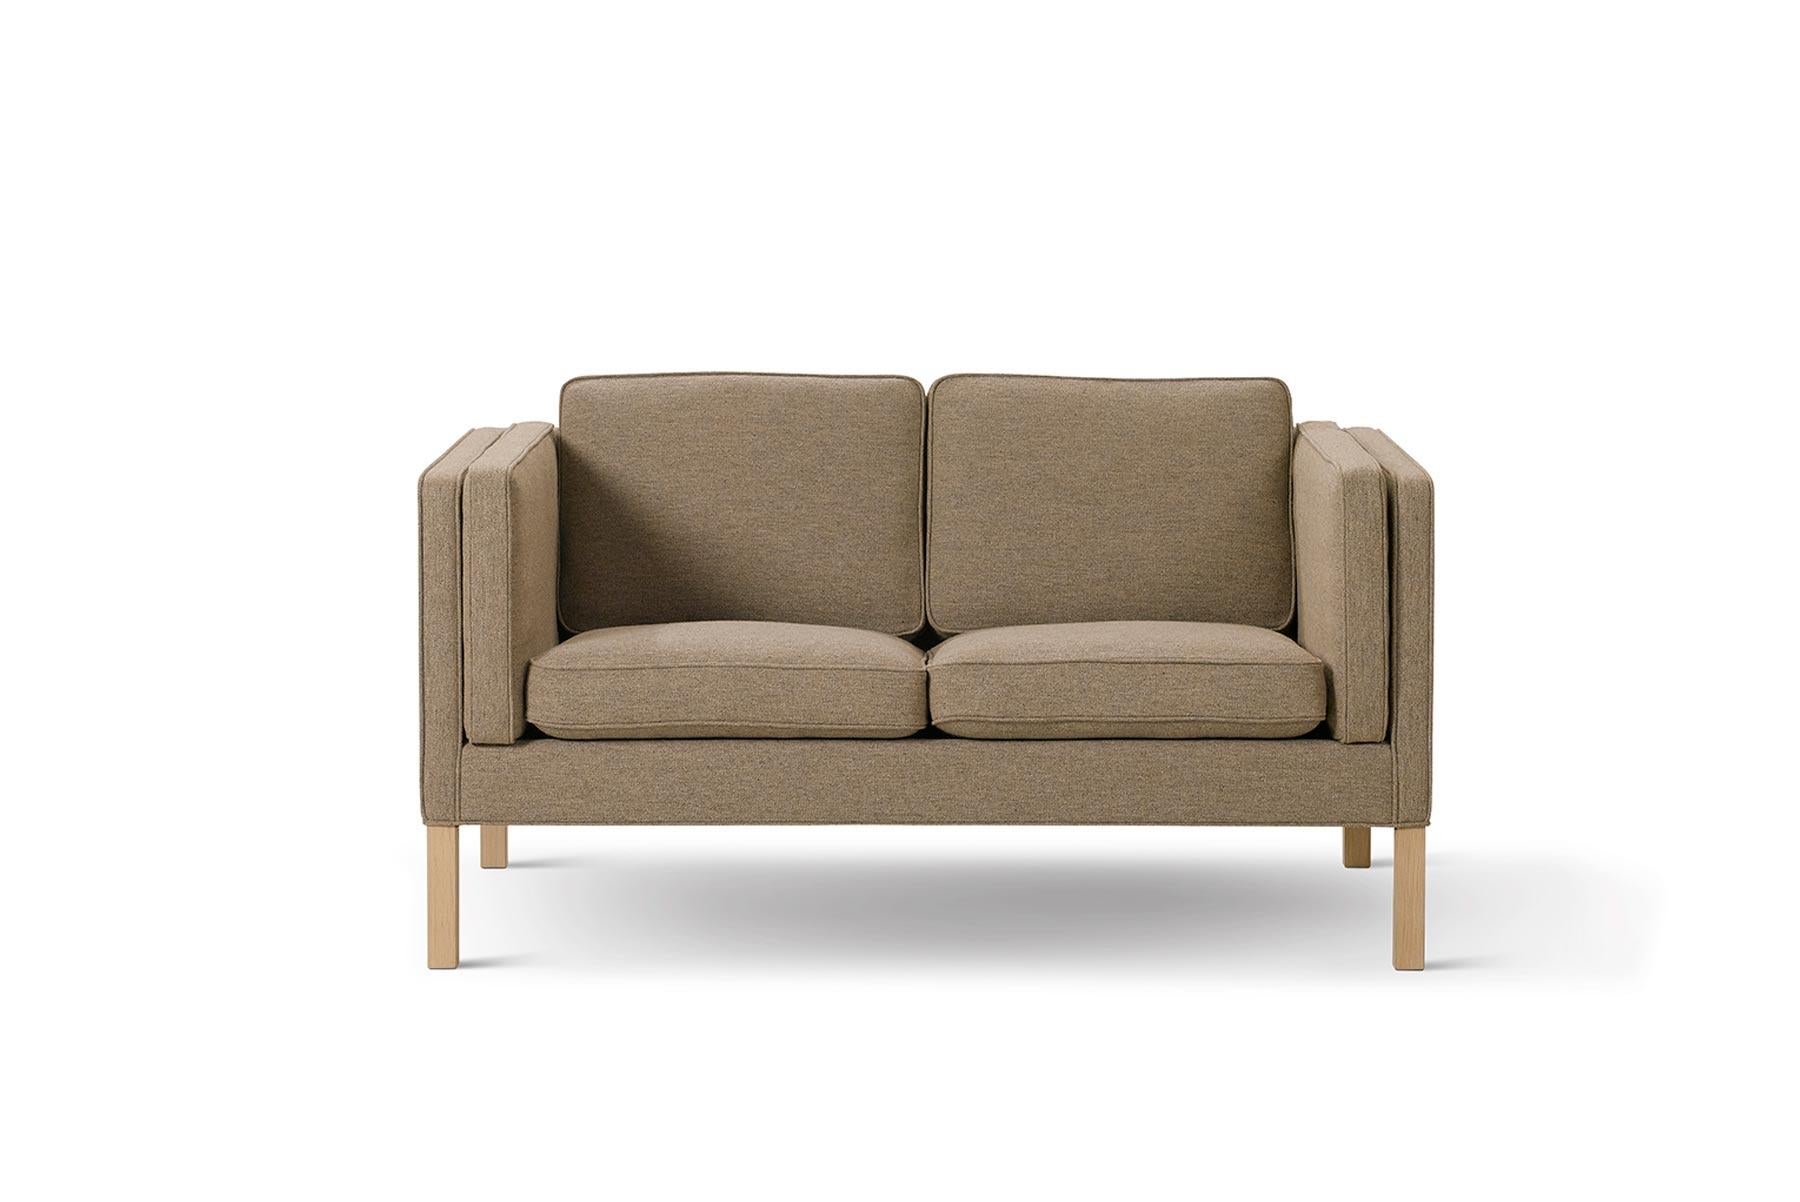 The 2332 2-seater sofa with rectangular sides was designed by Børge Mogensen in 1971. The geometric design was the conclusion of Mogensen’s Minimalist exclusive upholstered furniture range.